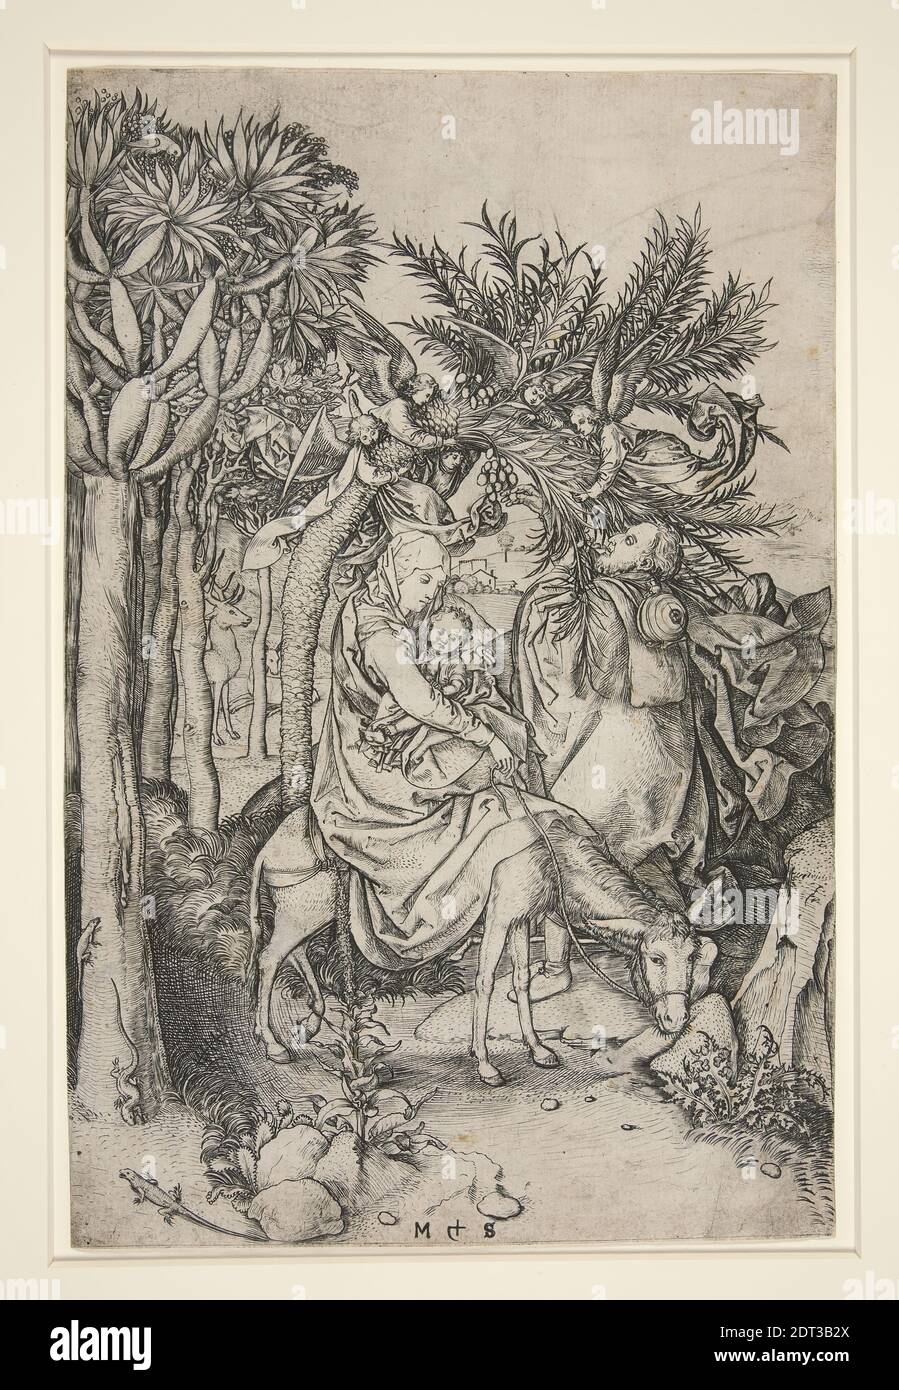 Artist: Martin Schongauer, German, ca. 1440/50–1491, The Flight into Egypt, ca. 1470–1475, Engraving, Sheet: 25.9 × 16.9 cm (10 3/16 × 6 5/8in.), Made in Germany, German, 15th century, Works on Paper - Prints Stock Photo